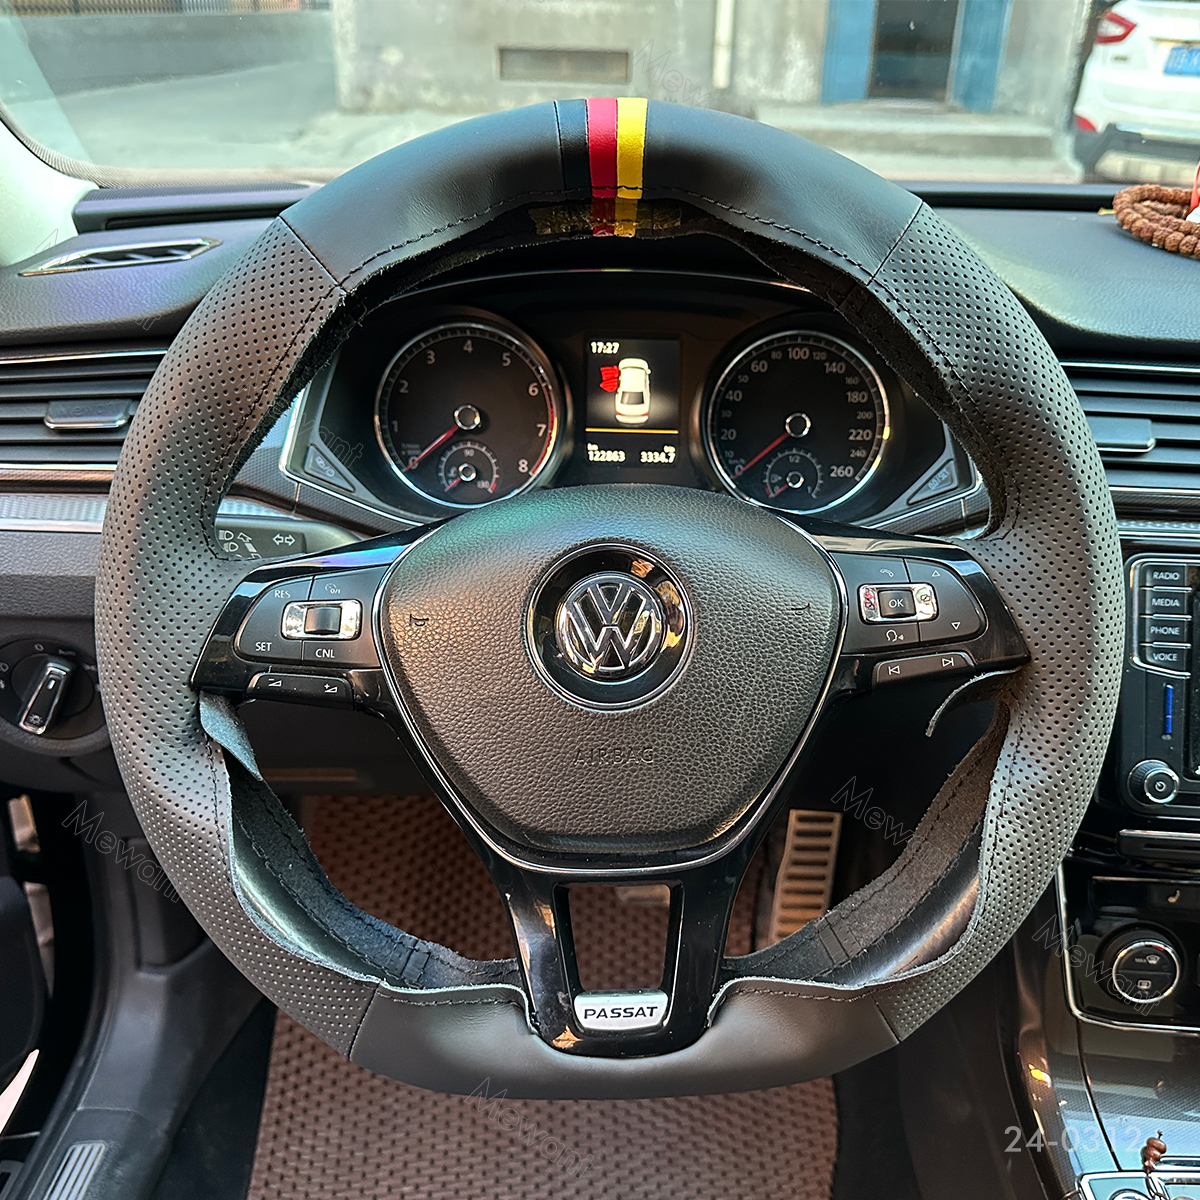 Discover the Luxurious Look of the MEWANT Steering Wheel Cover for VW Golf 